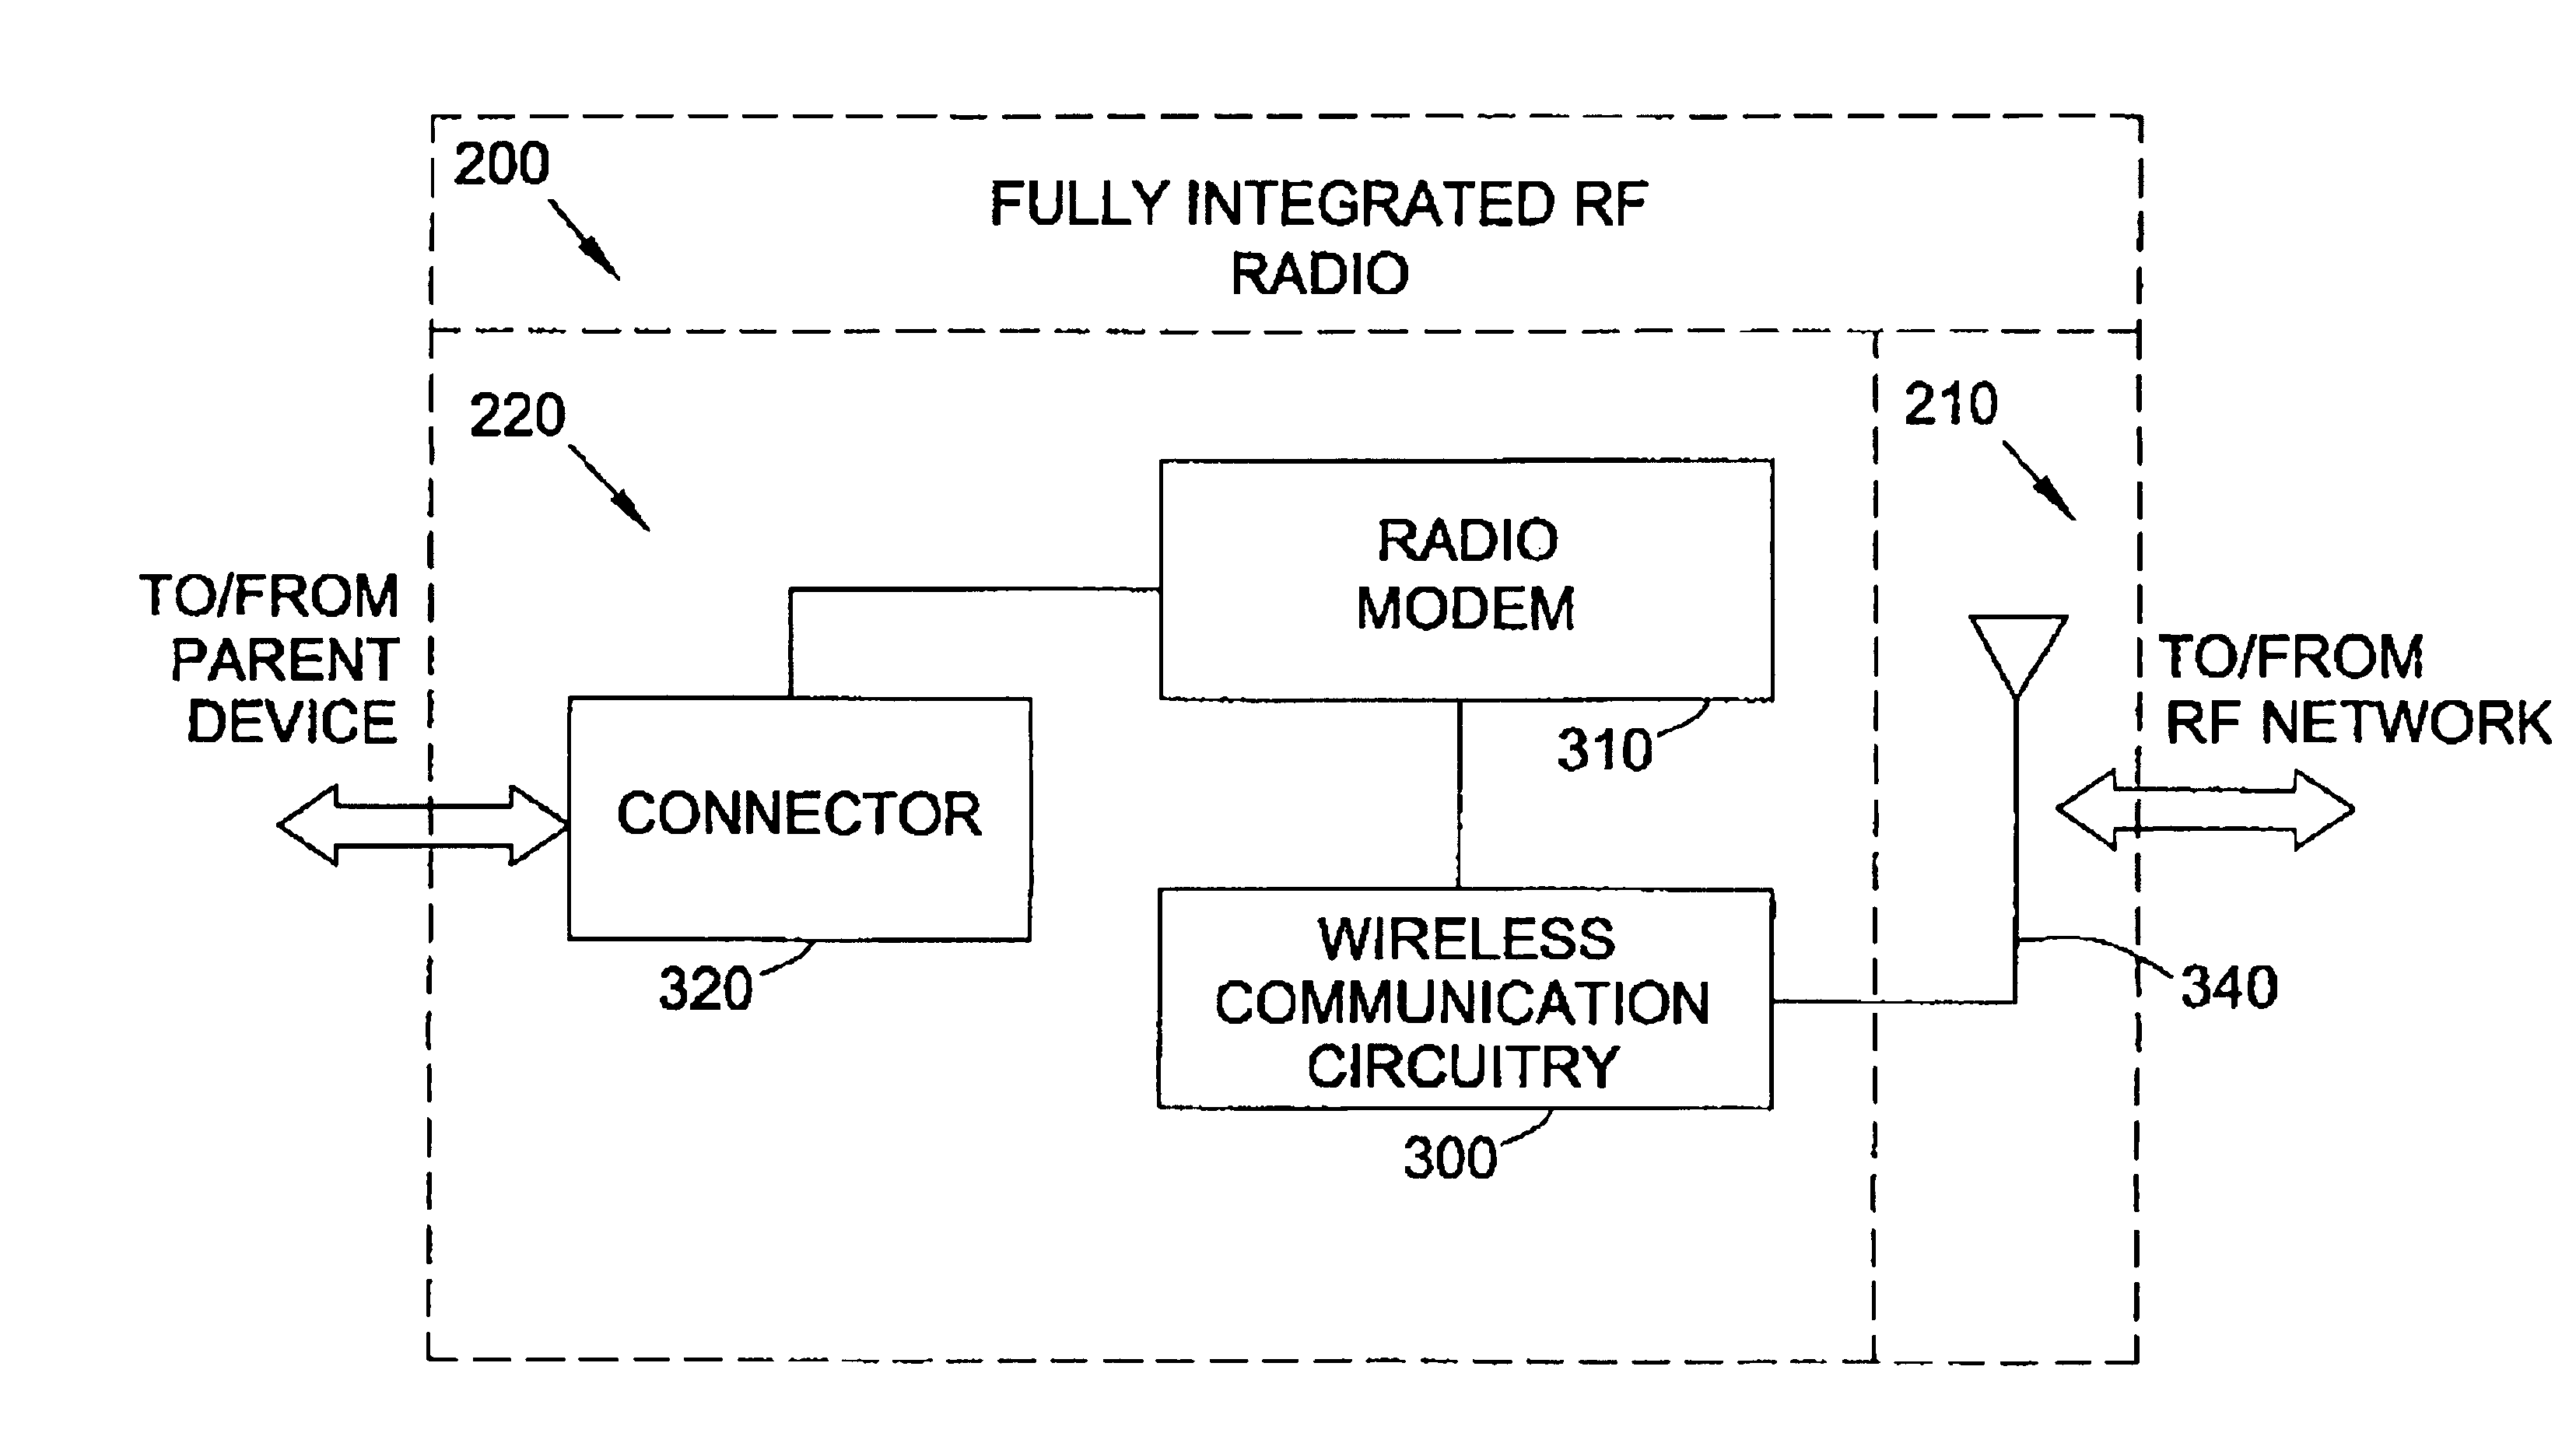 Standardized RF module insert for a portable electronic processing device